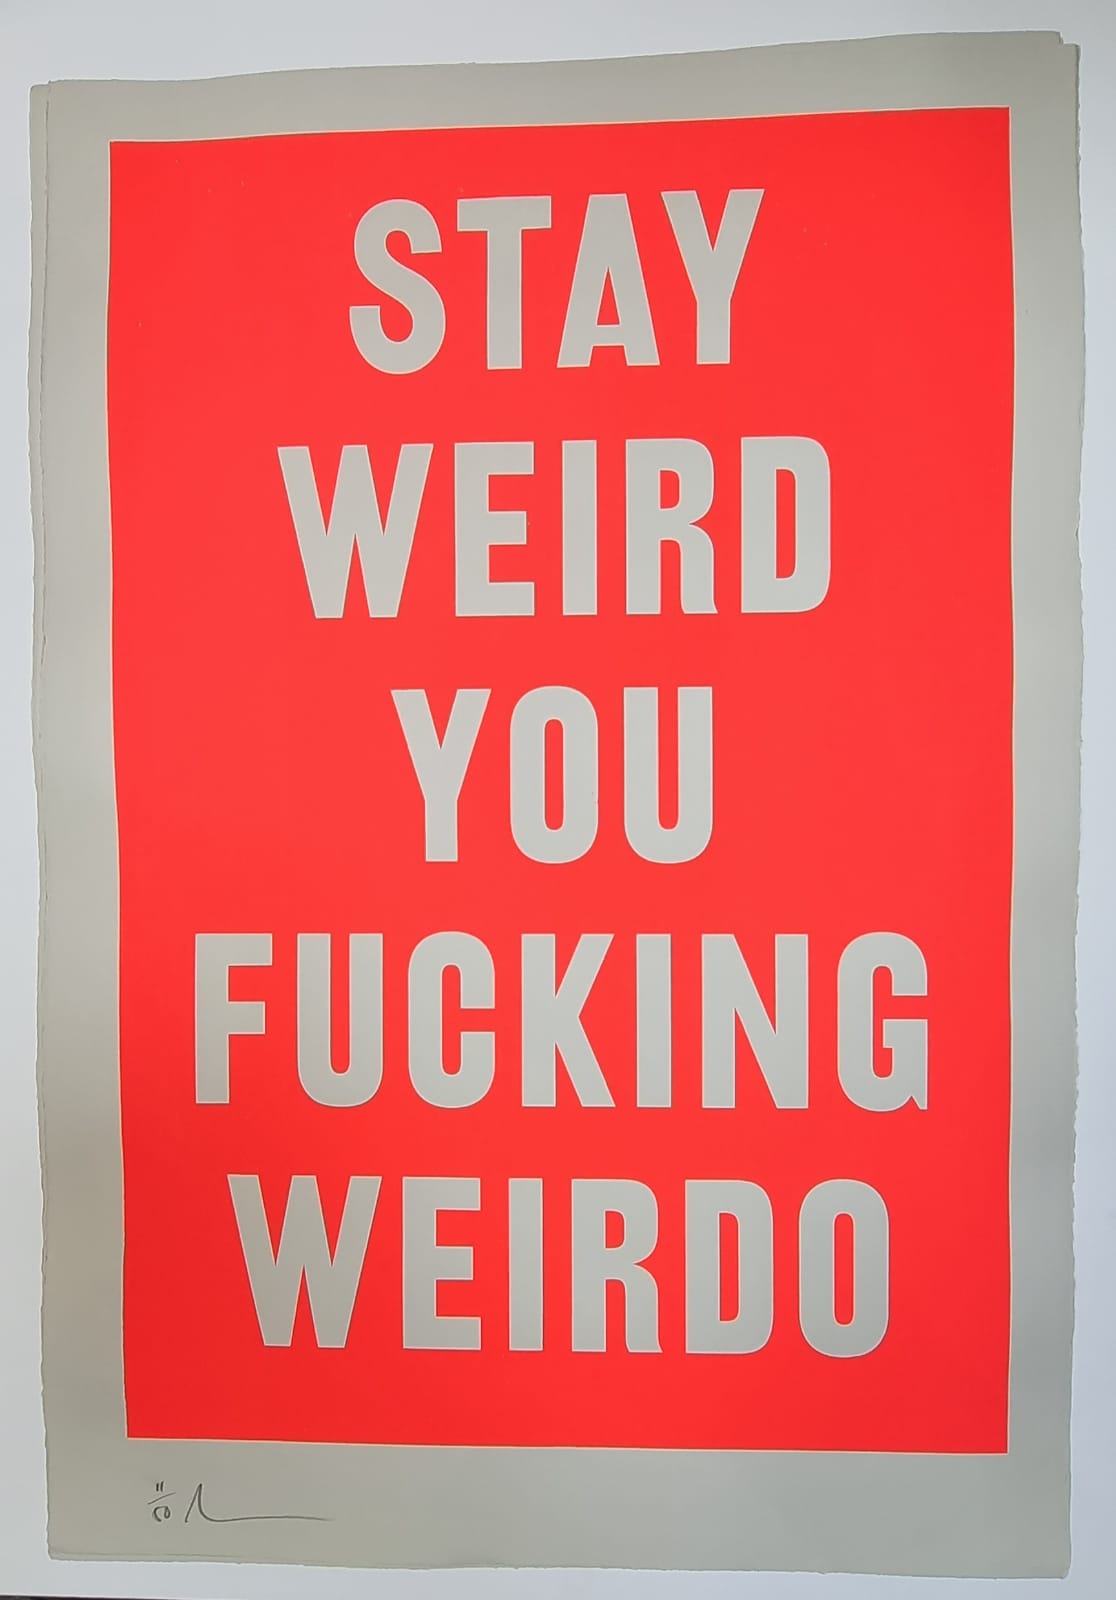 Image of STAY WEIRD YOU FUCKING WEIRDO by Hackney Dave (Harley pulled edition)